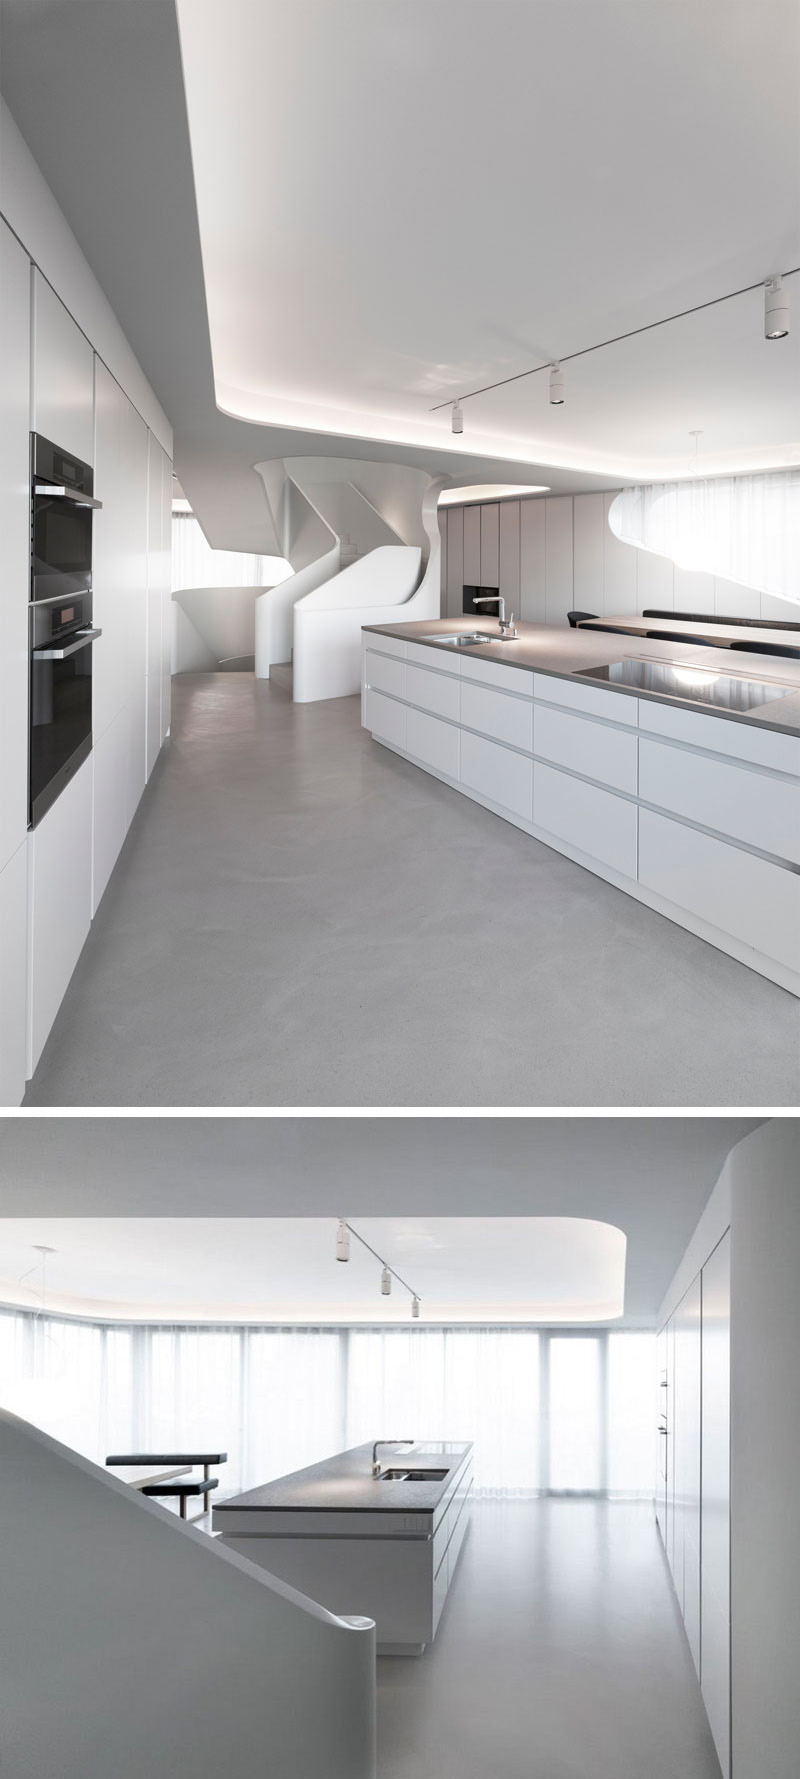 This modern kitchen has track lighting along with hidden lighting in the recessed ceiling, ensuring that the white and grey island is always brightly lit. Large white cabinets and drawers provide plenty of storage in this open kitchen. 